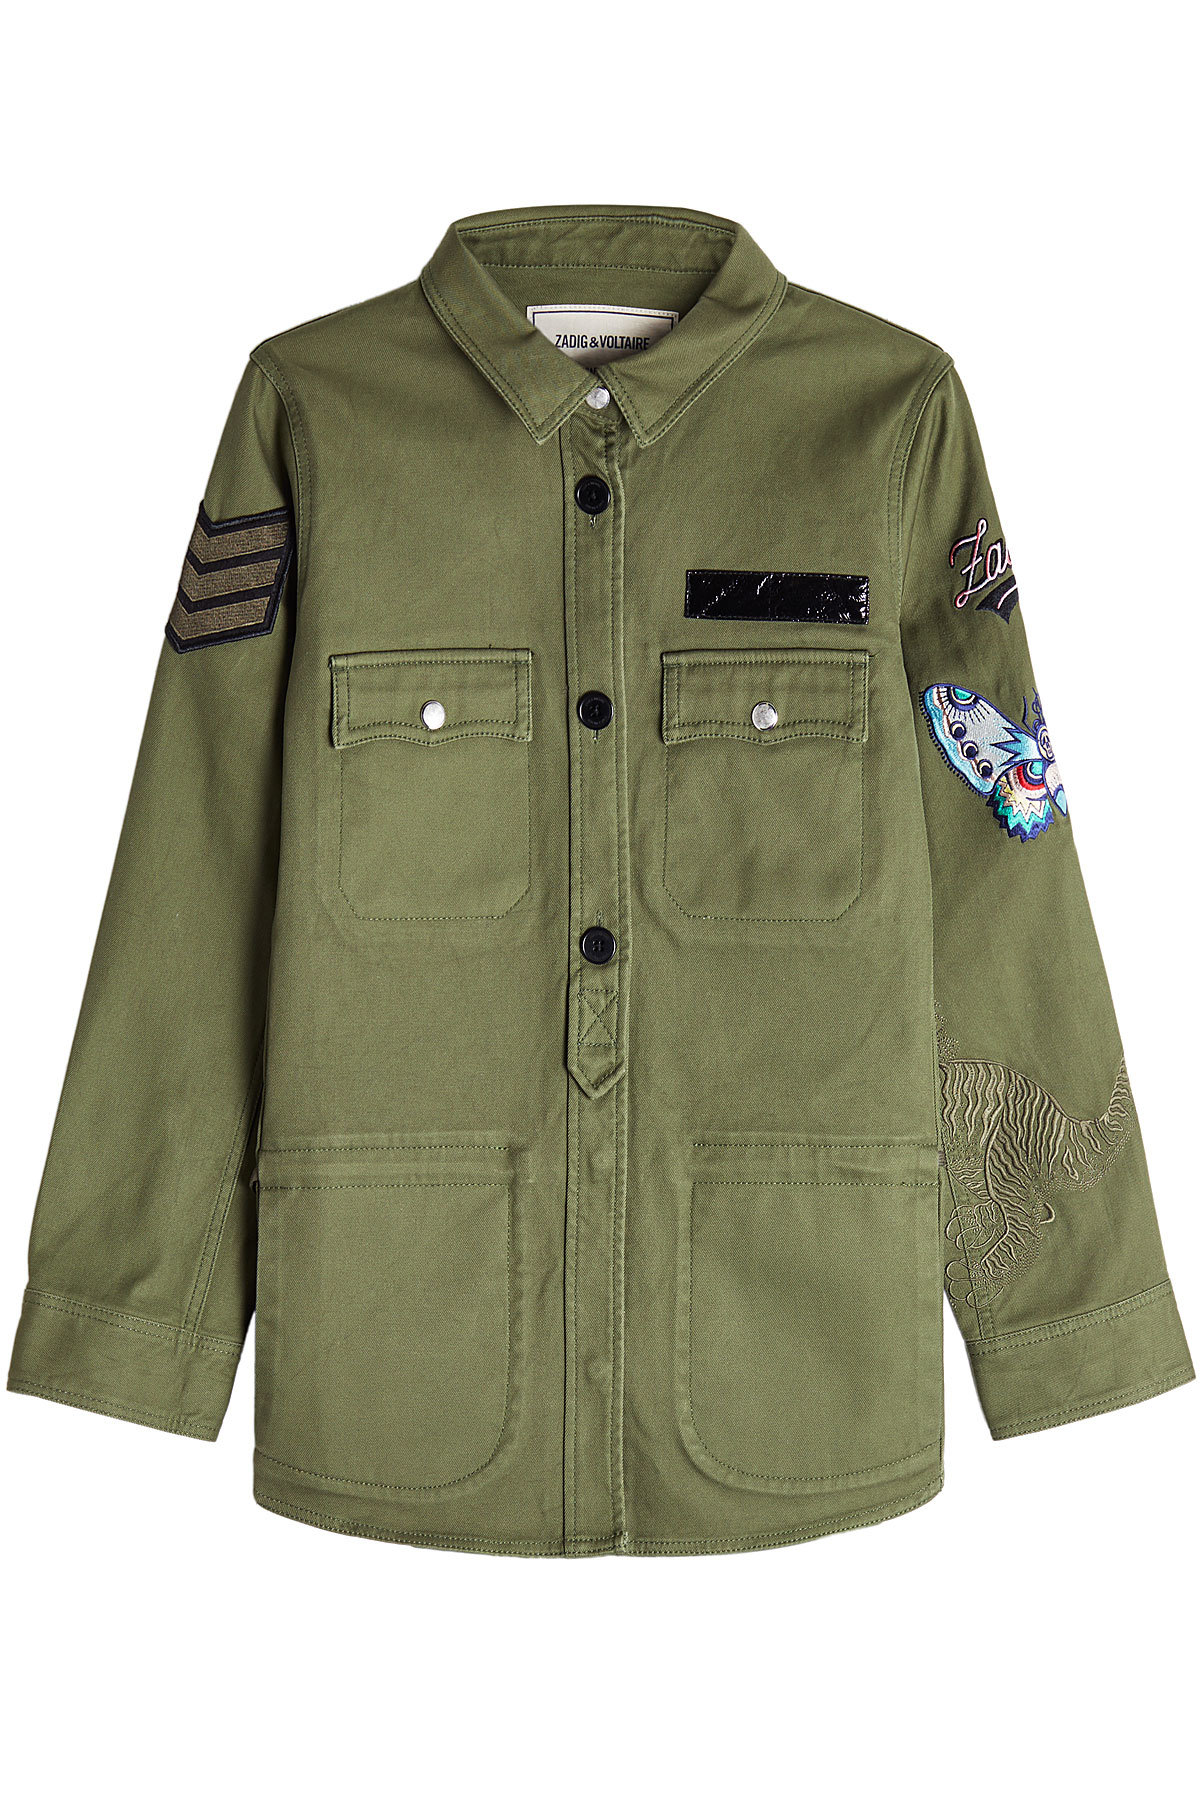 Zadig & Voltaire - Military Cotton Jacket with Patches